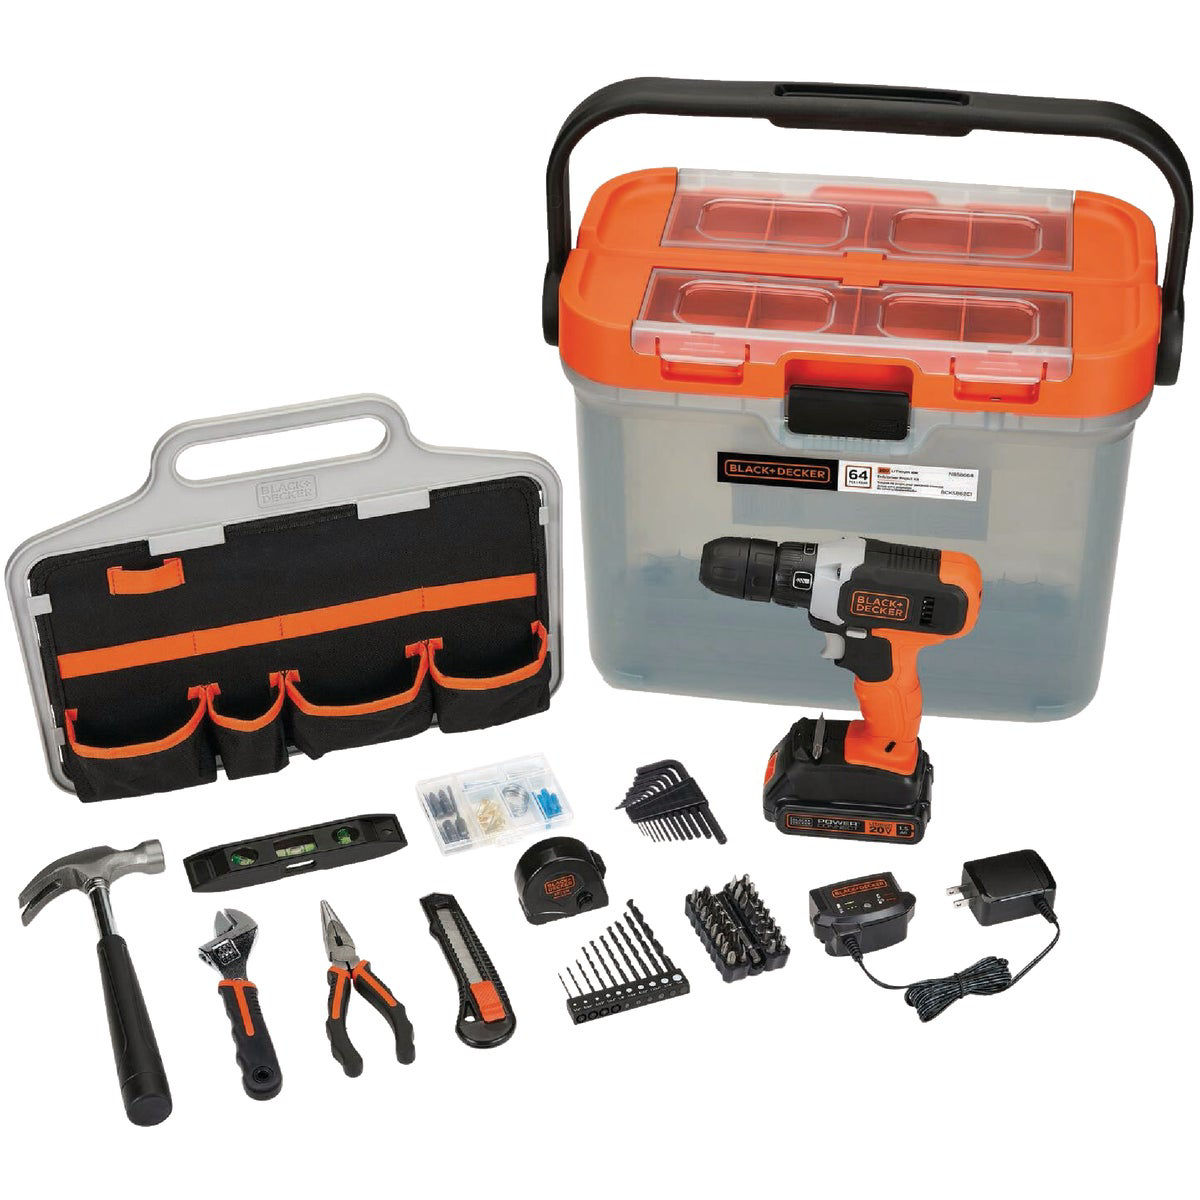 Black & Decker 20-Volt MAX Lithium-Ion Cordless Drill/Driver & 63-Piece  Hand Tool & Accessory Home Project Kit